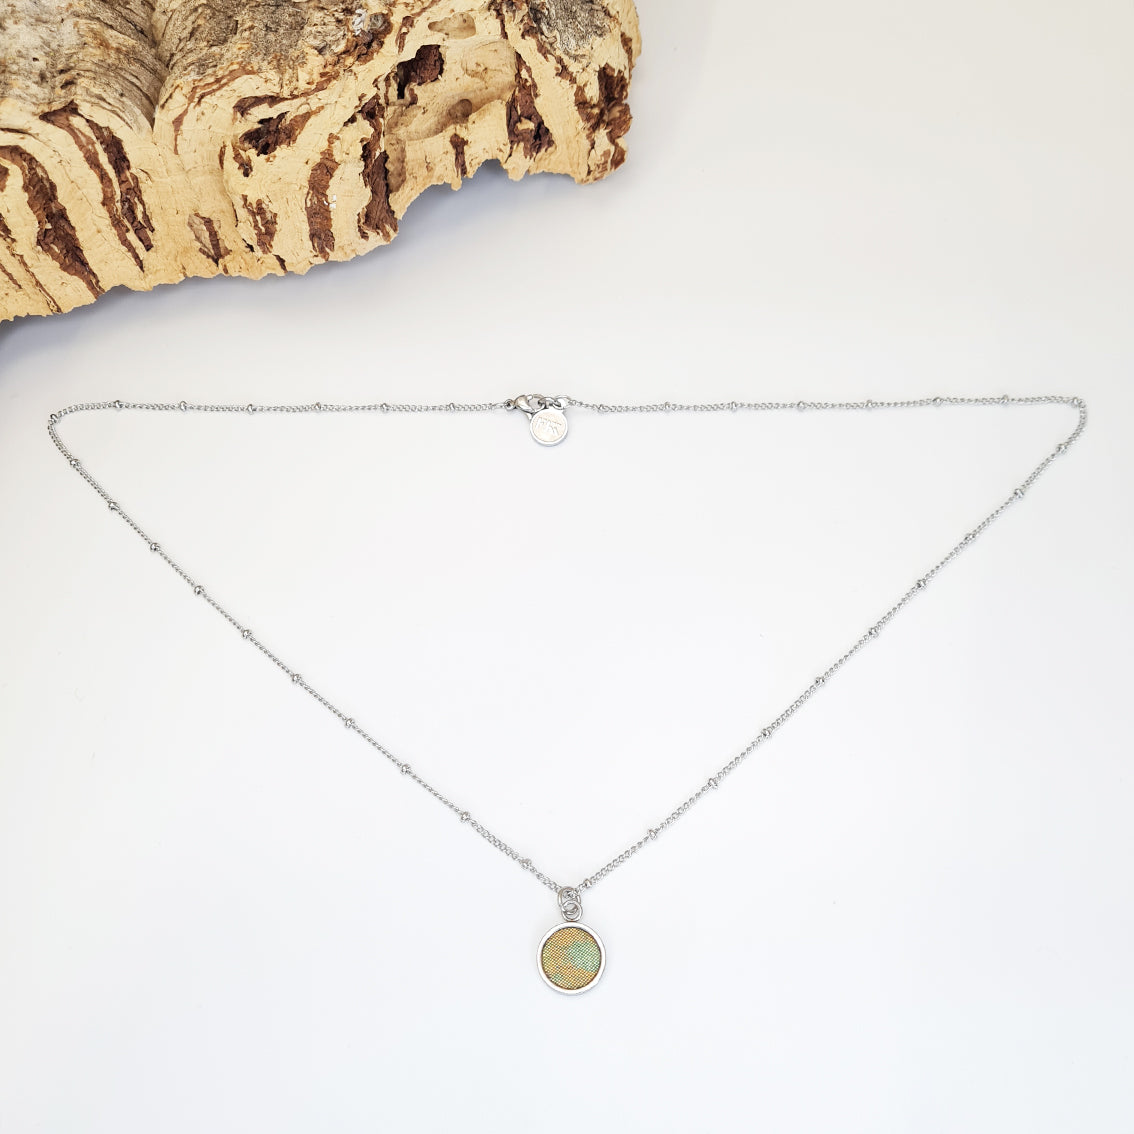 stainless steel dotted chain necklace with eco vegan cork charm in iridescent green  